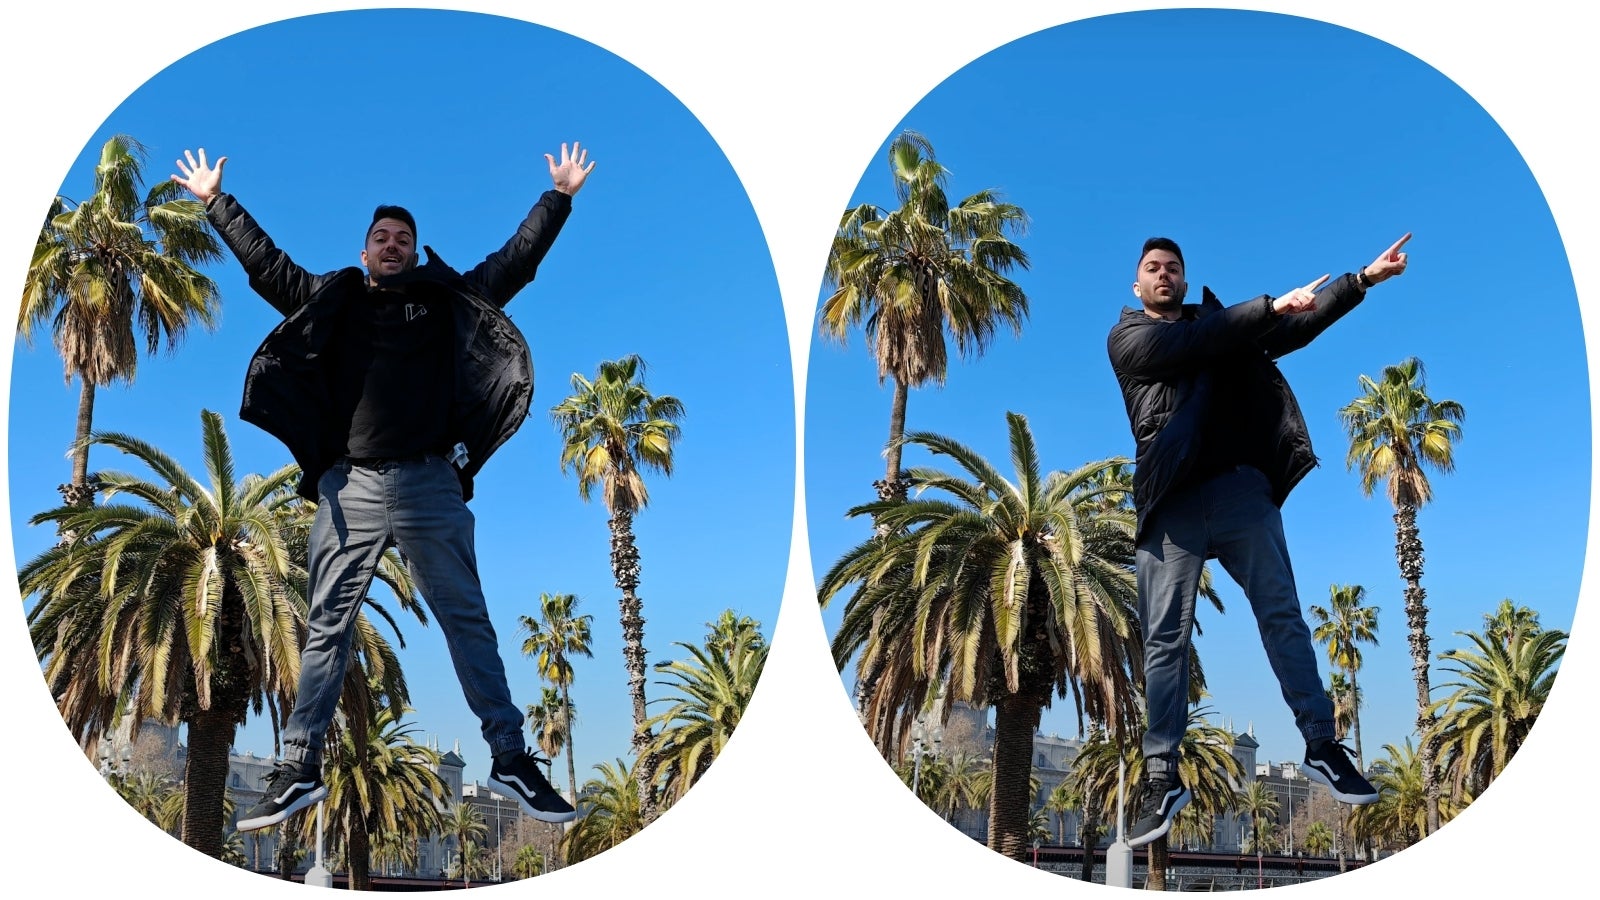 Motion Capture can freeze you at the highest point of your jump - automatically! Image courtesy of TechNick. - Huawei legacy reborn with full Google support! Stunning Honor Magic 5 Pro - Samsung’s new nemesis?